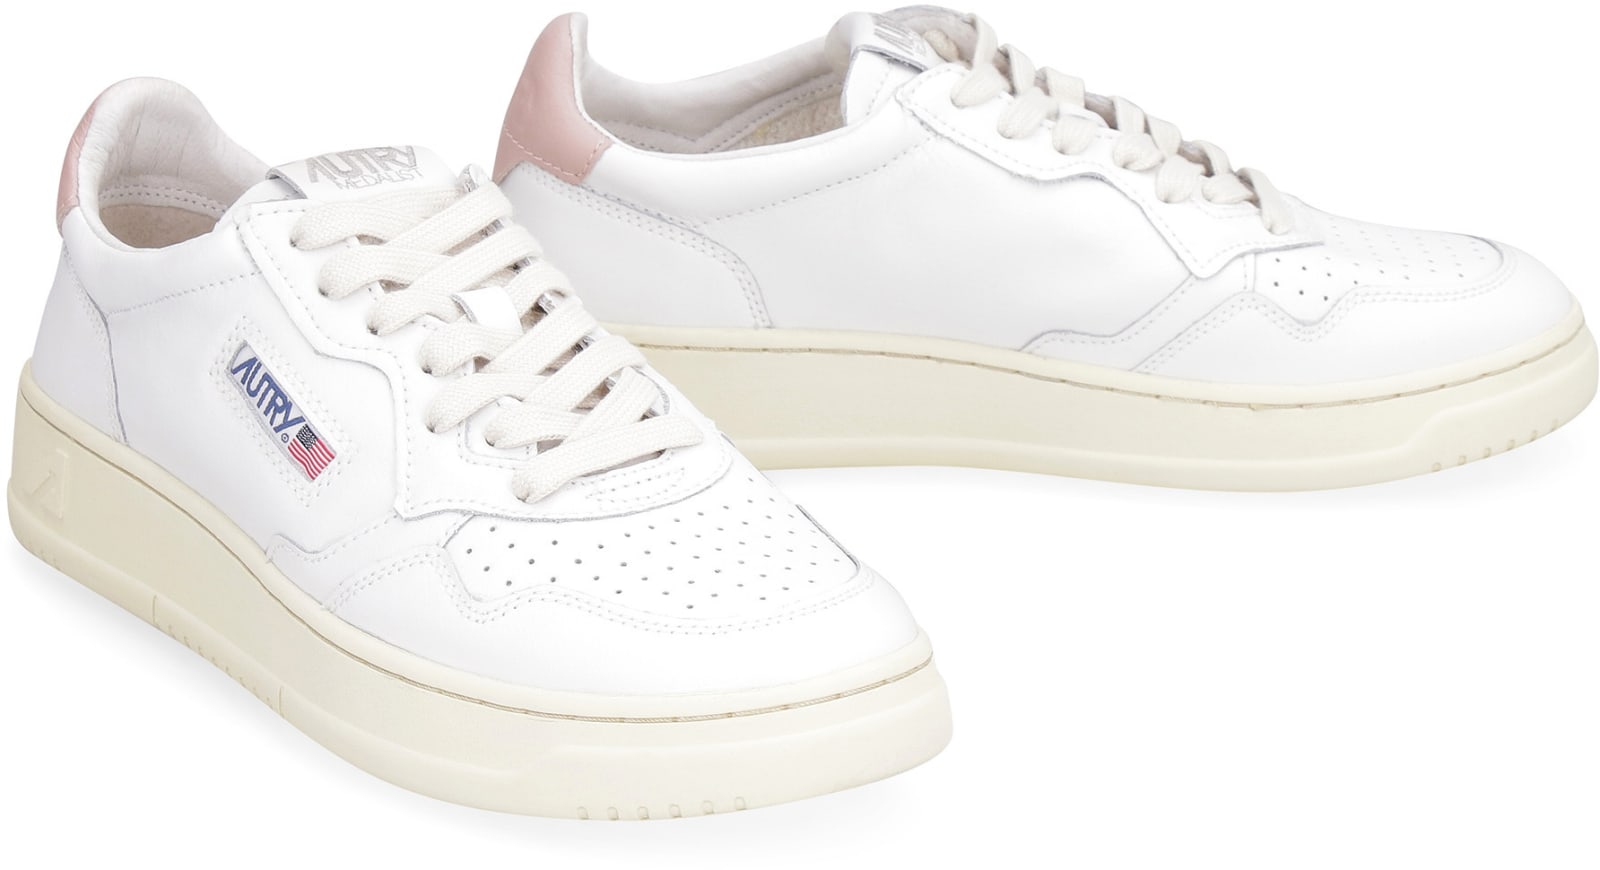 Shop Autry Medalist Leather Low-top Sneakers In Pink